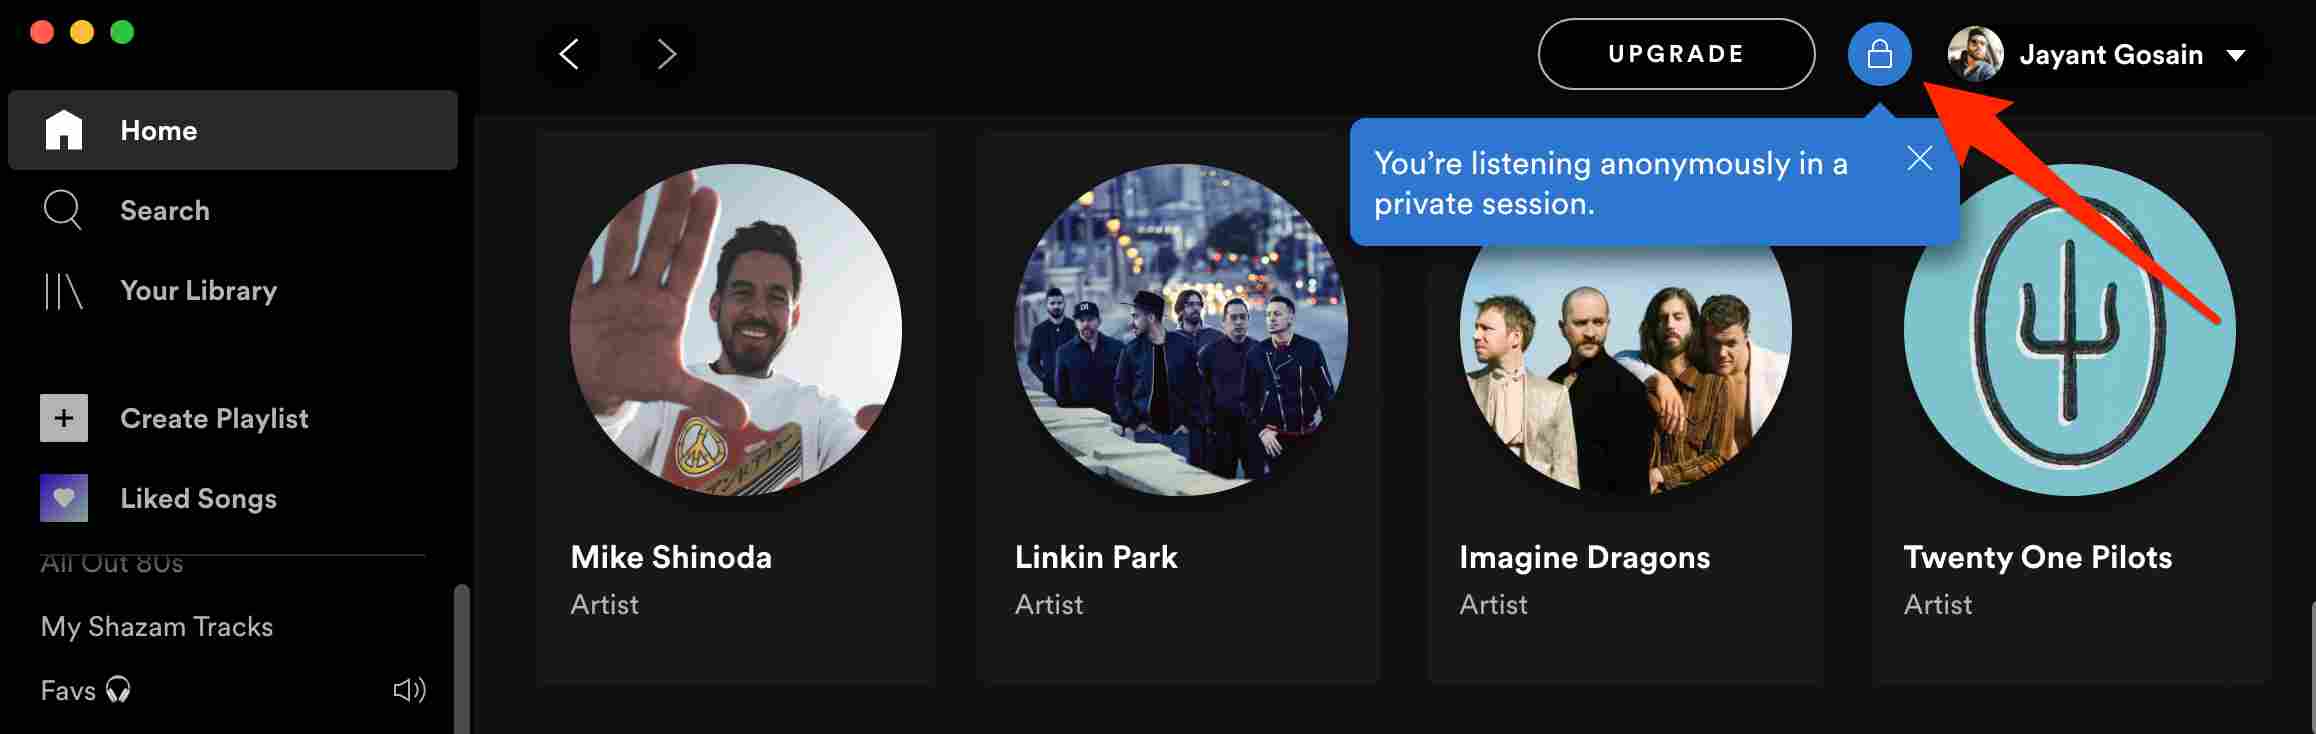 spotify-private-session-activated